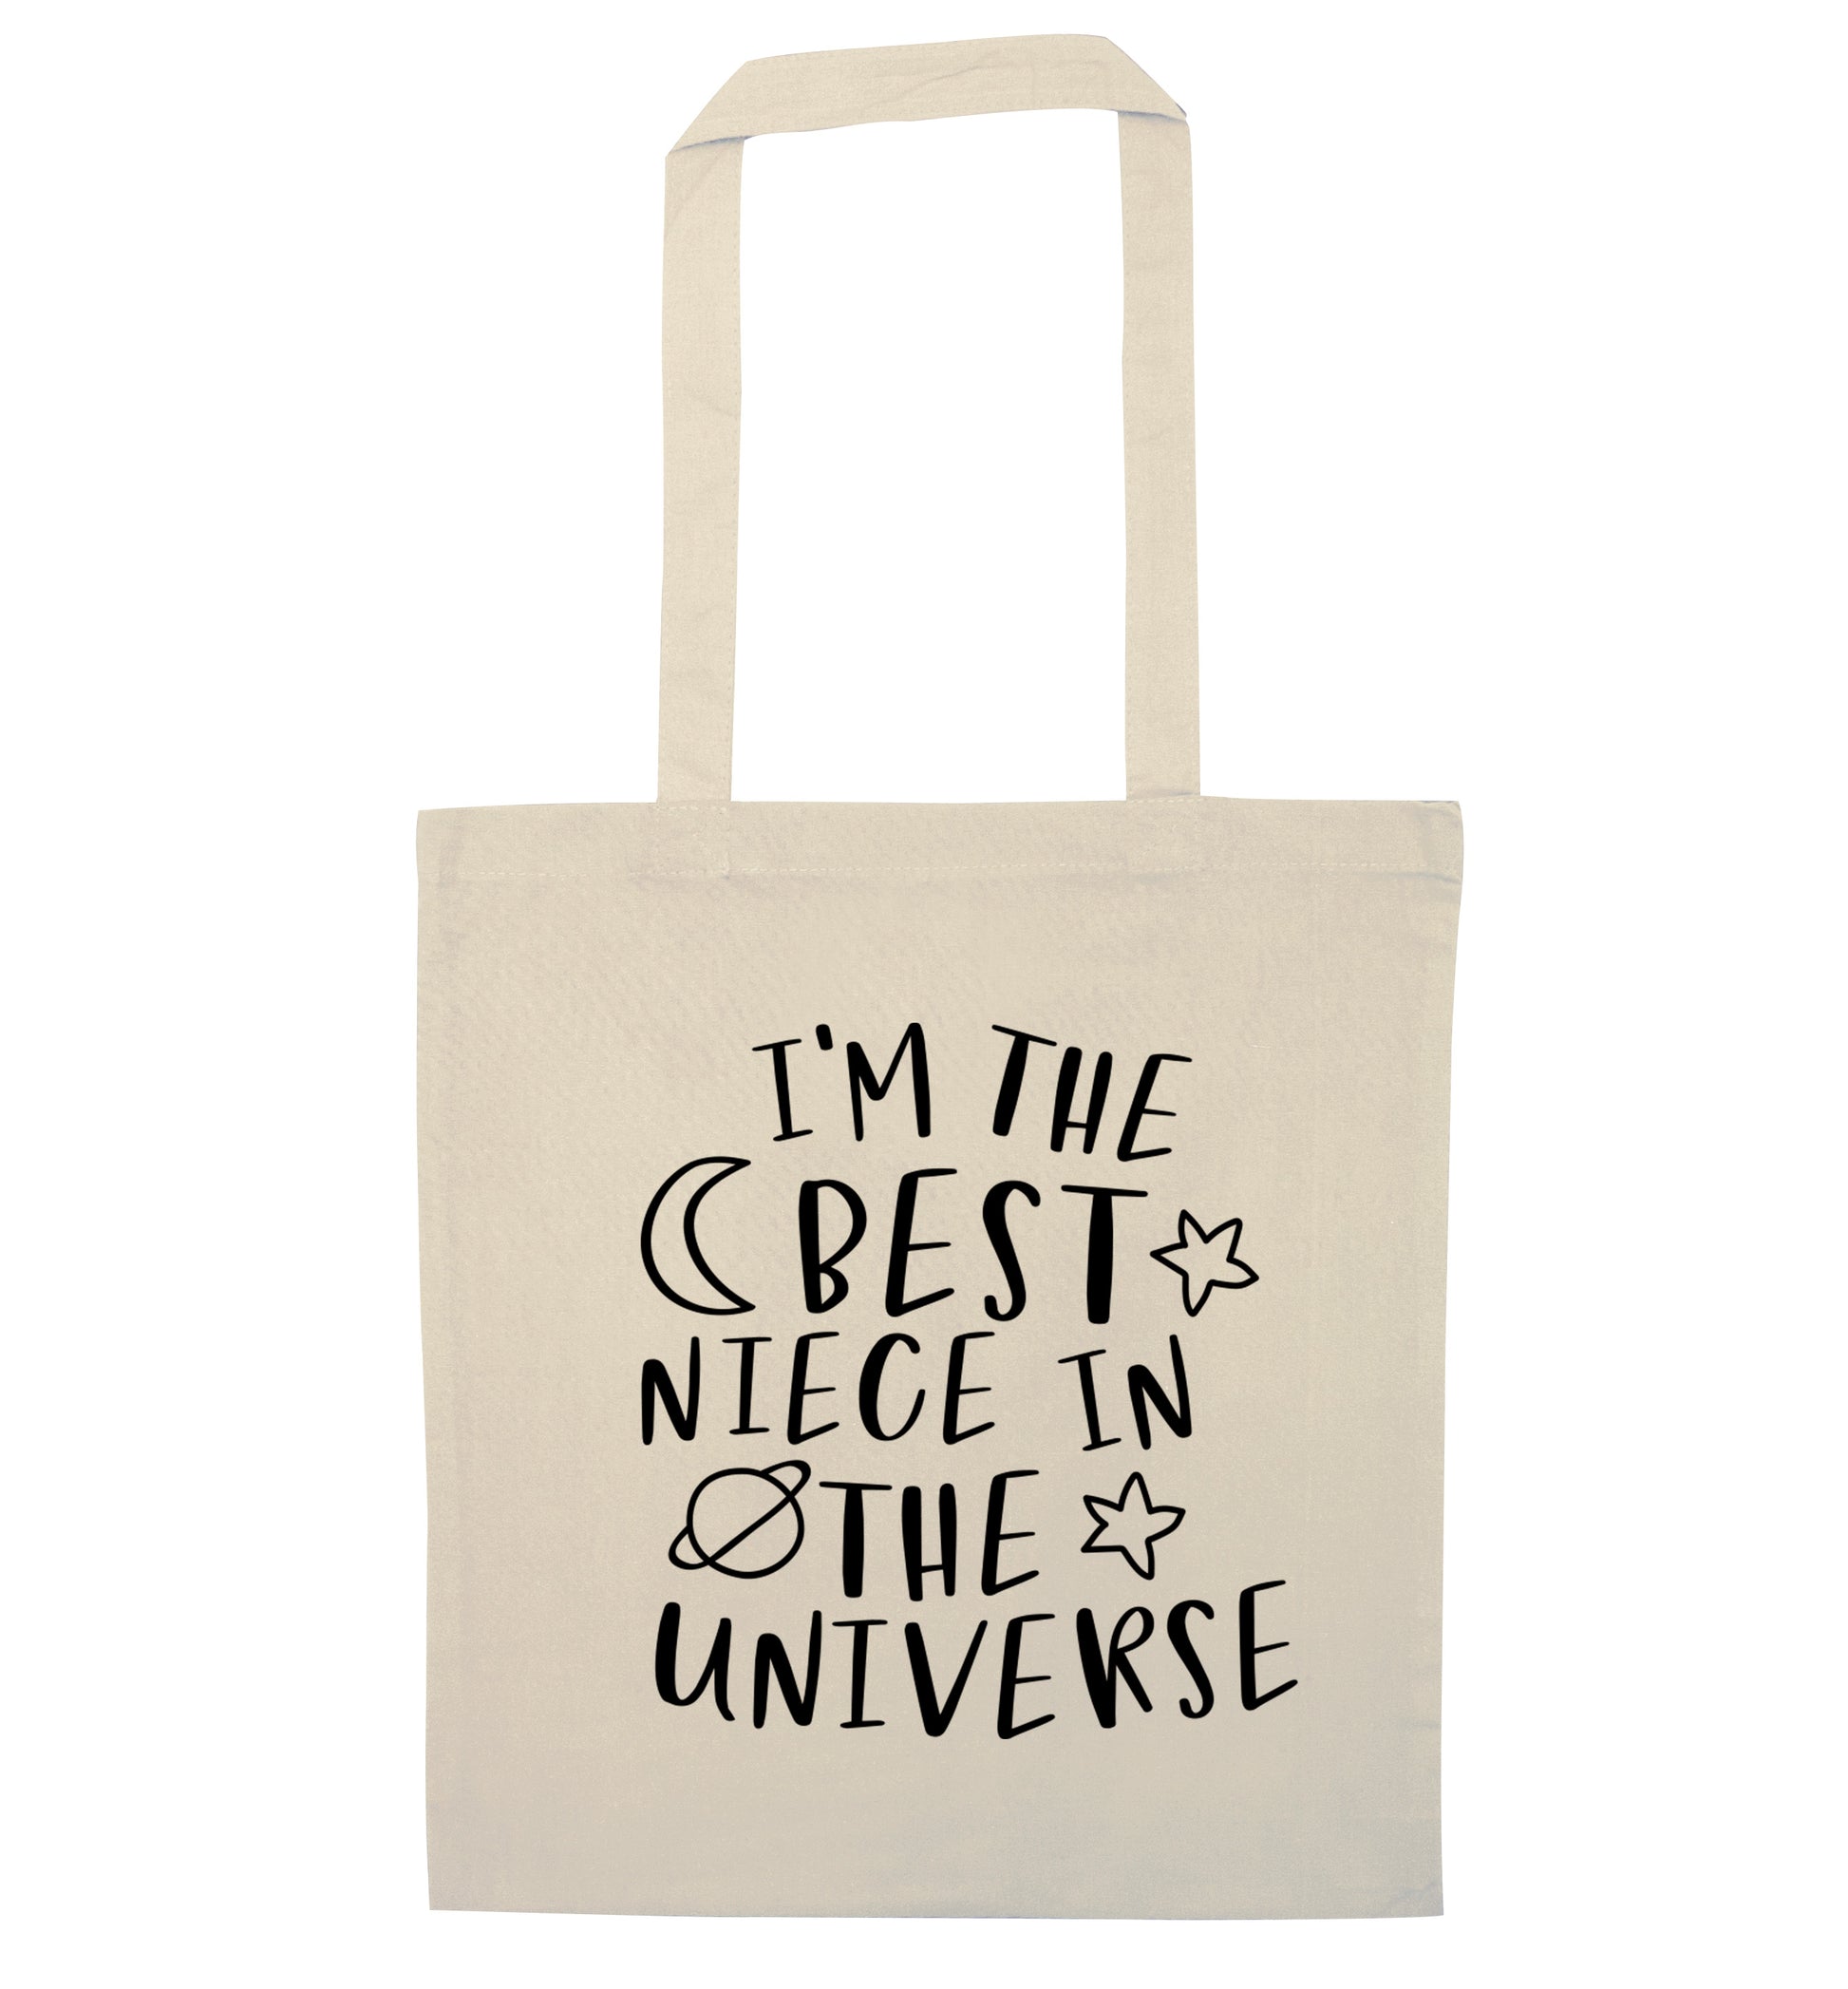 I'm the best niece in the universe natural tote bag